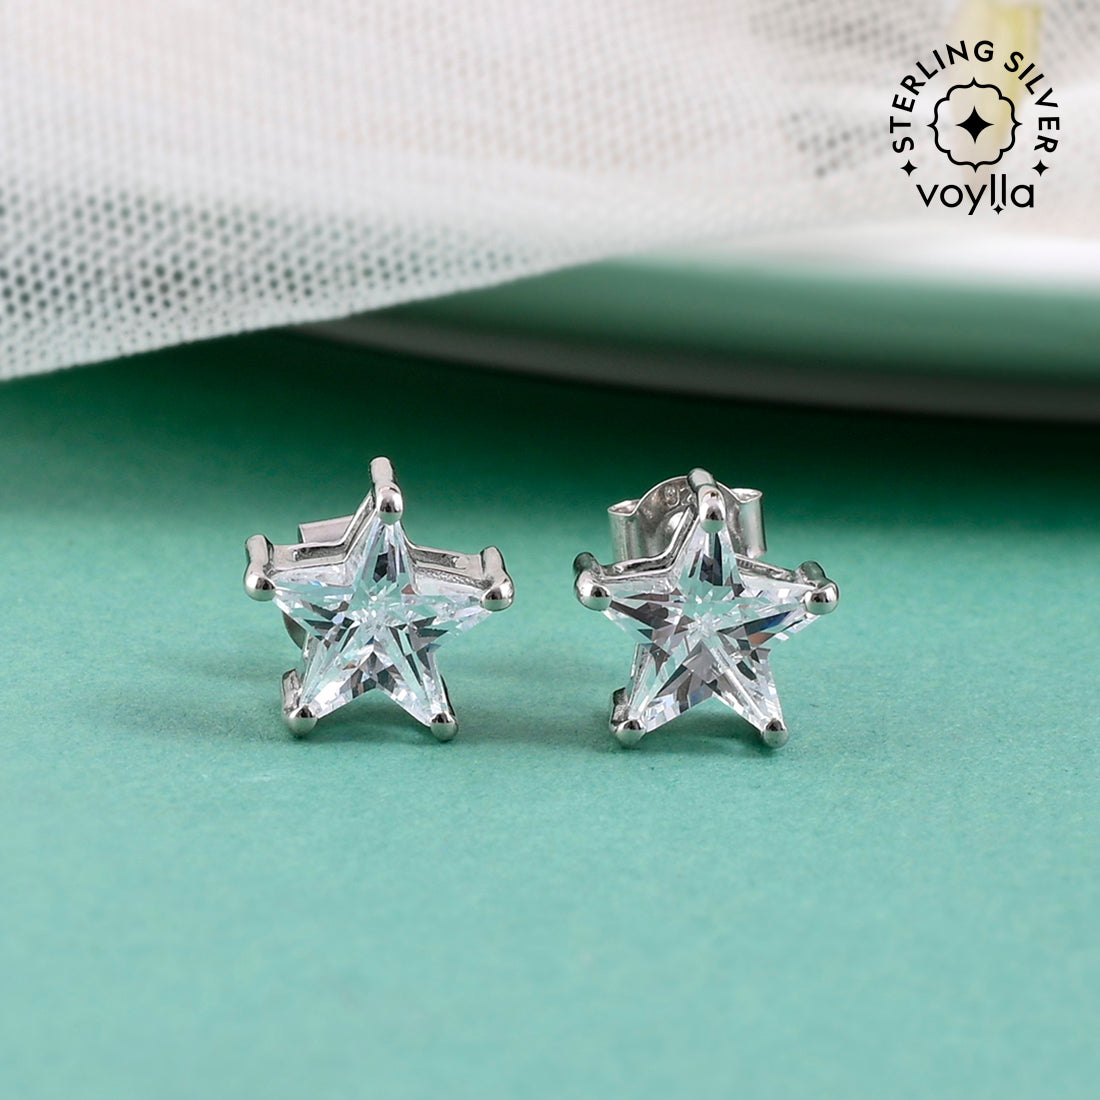 CLARA 925 Sterling Silver Swiss Zirconia Daisy Earring With Screw Back  Gift Buy CLARA 925 Sterling Silver Swiss Zirconia Daisy Earring With Screw  Back Gift Online at Best Price in India  Nykaa